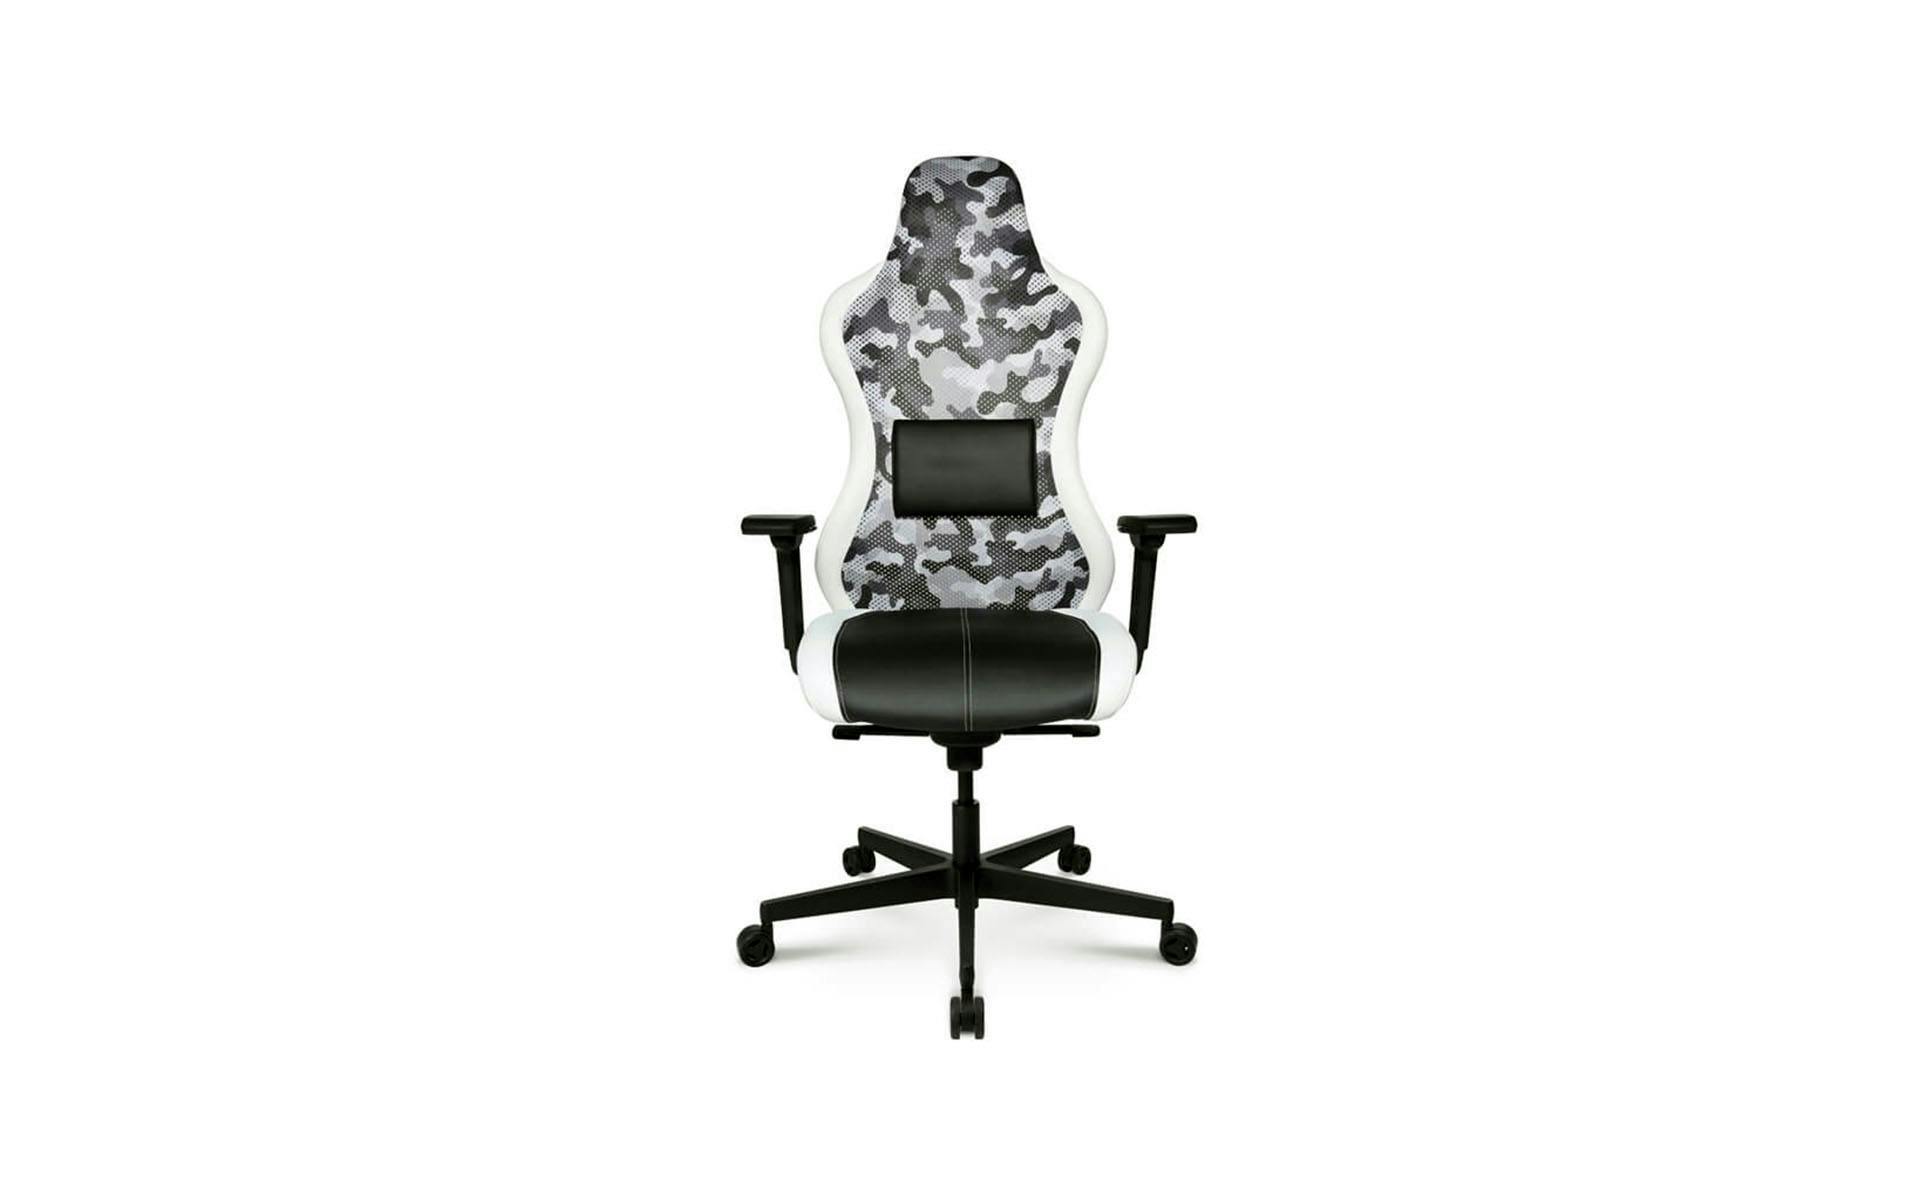 Slim gamer chair in a camouflage design